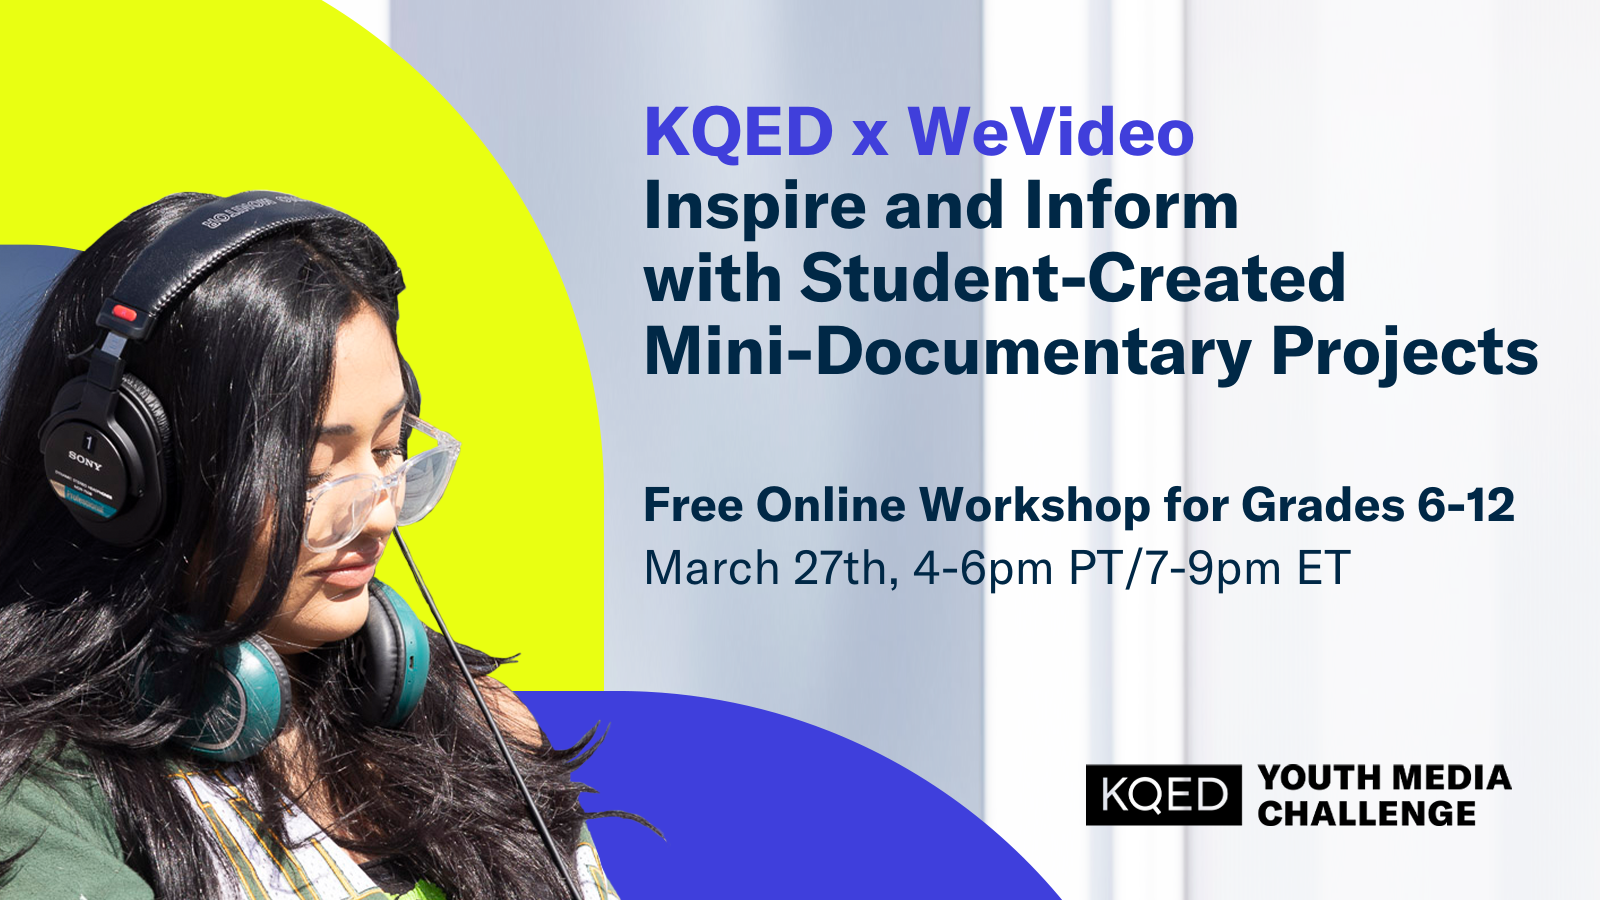 Event title: KQED x WeVideo: Inspire and Inform with Student Mini-Documentary Projects. Image: Student wearing looking down and wearing headphones.